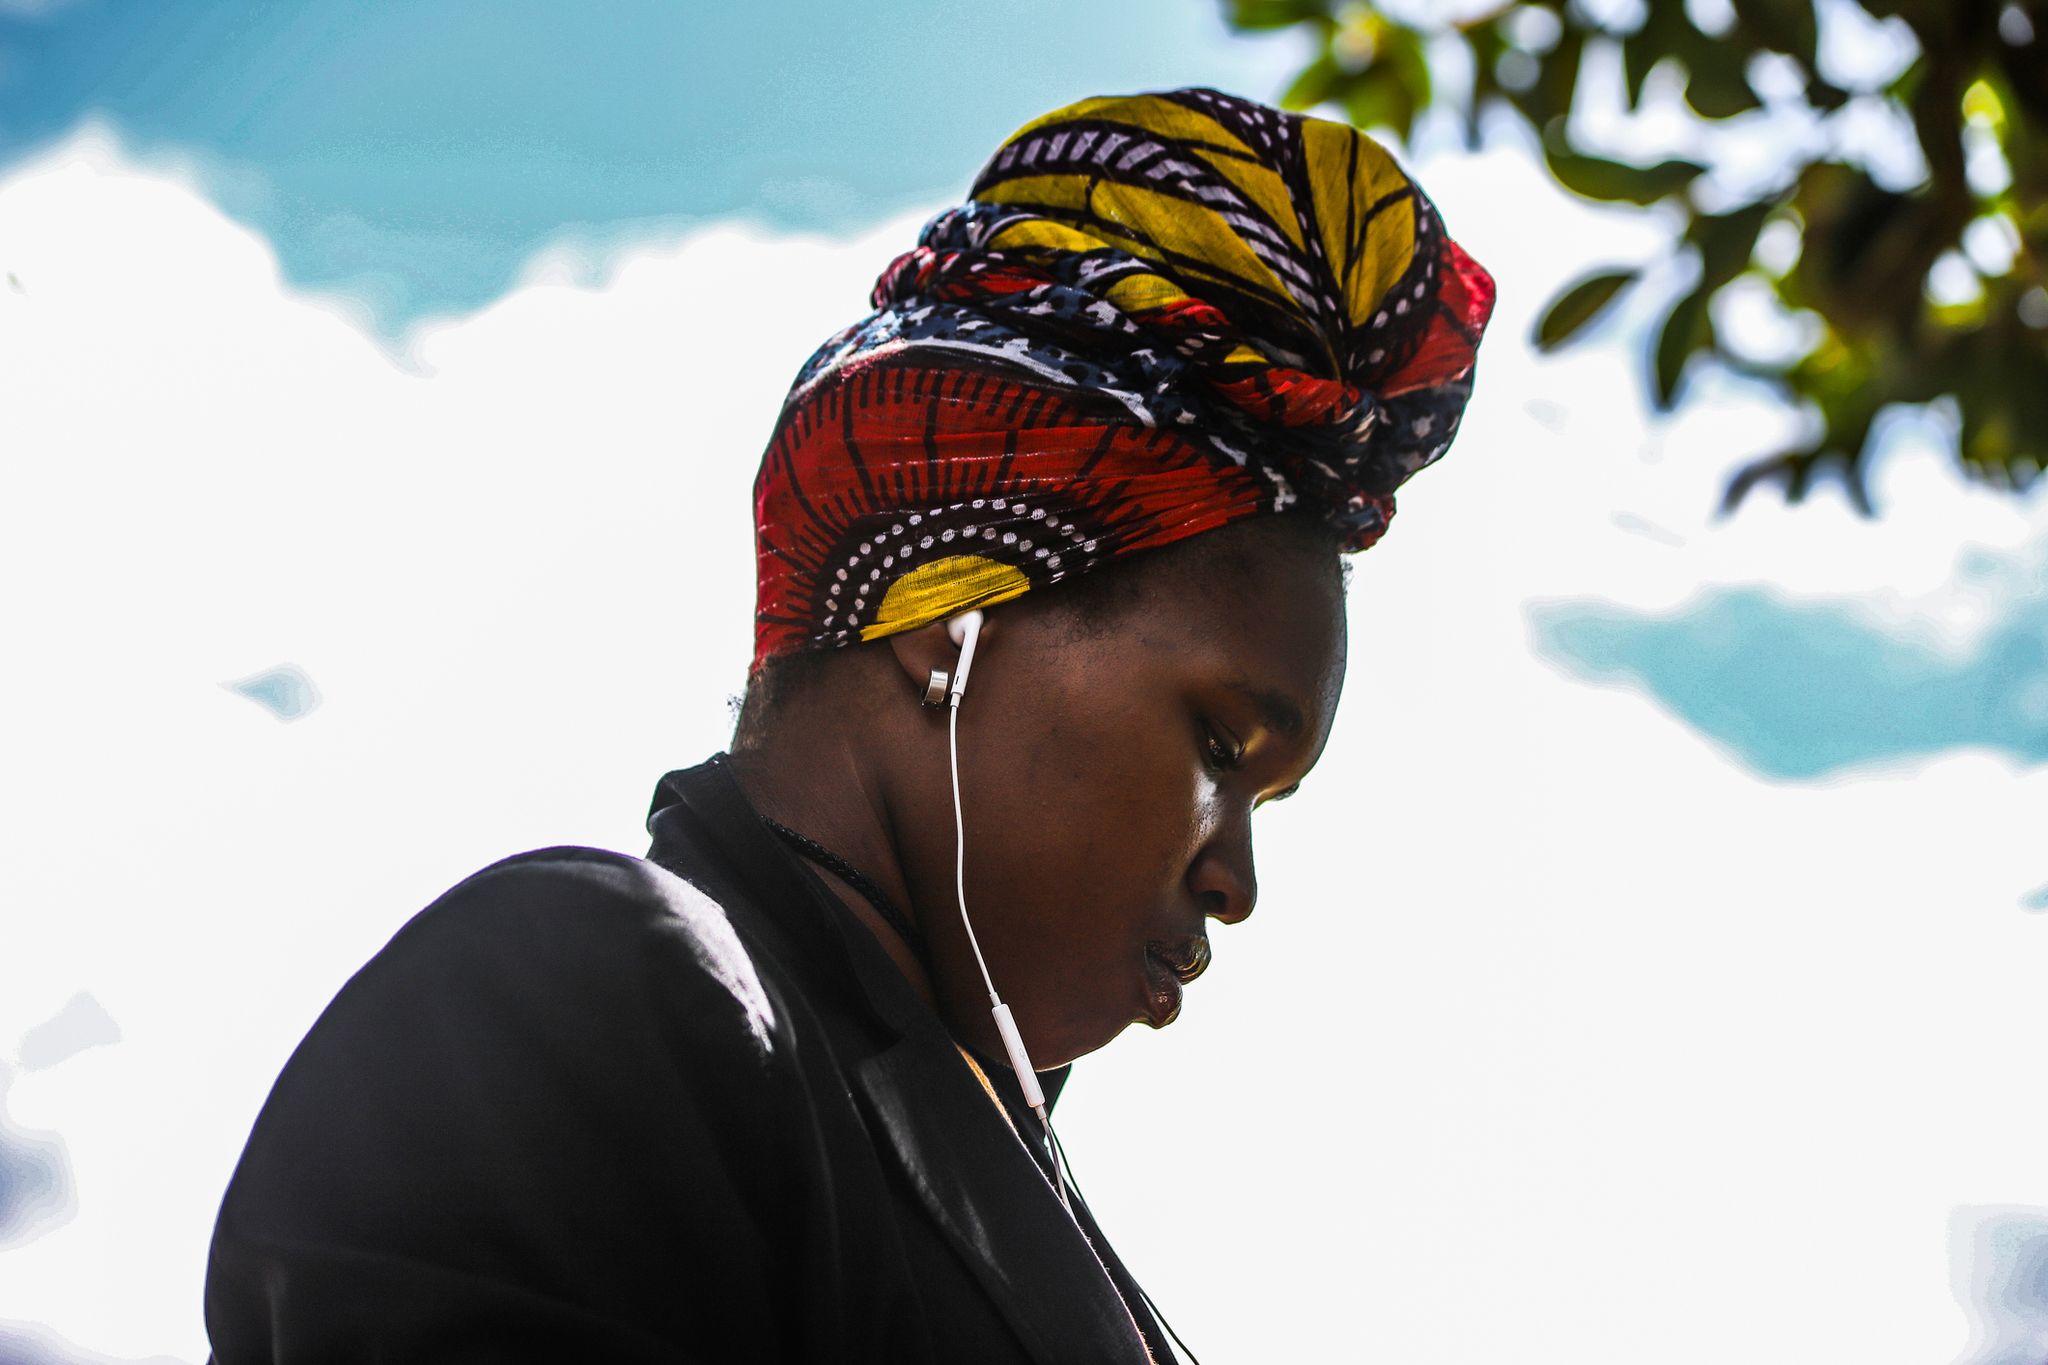 A young woman listening to music on her earphone